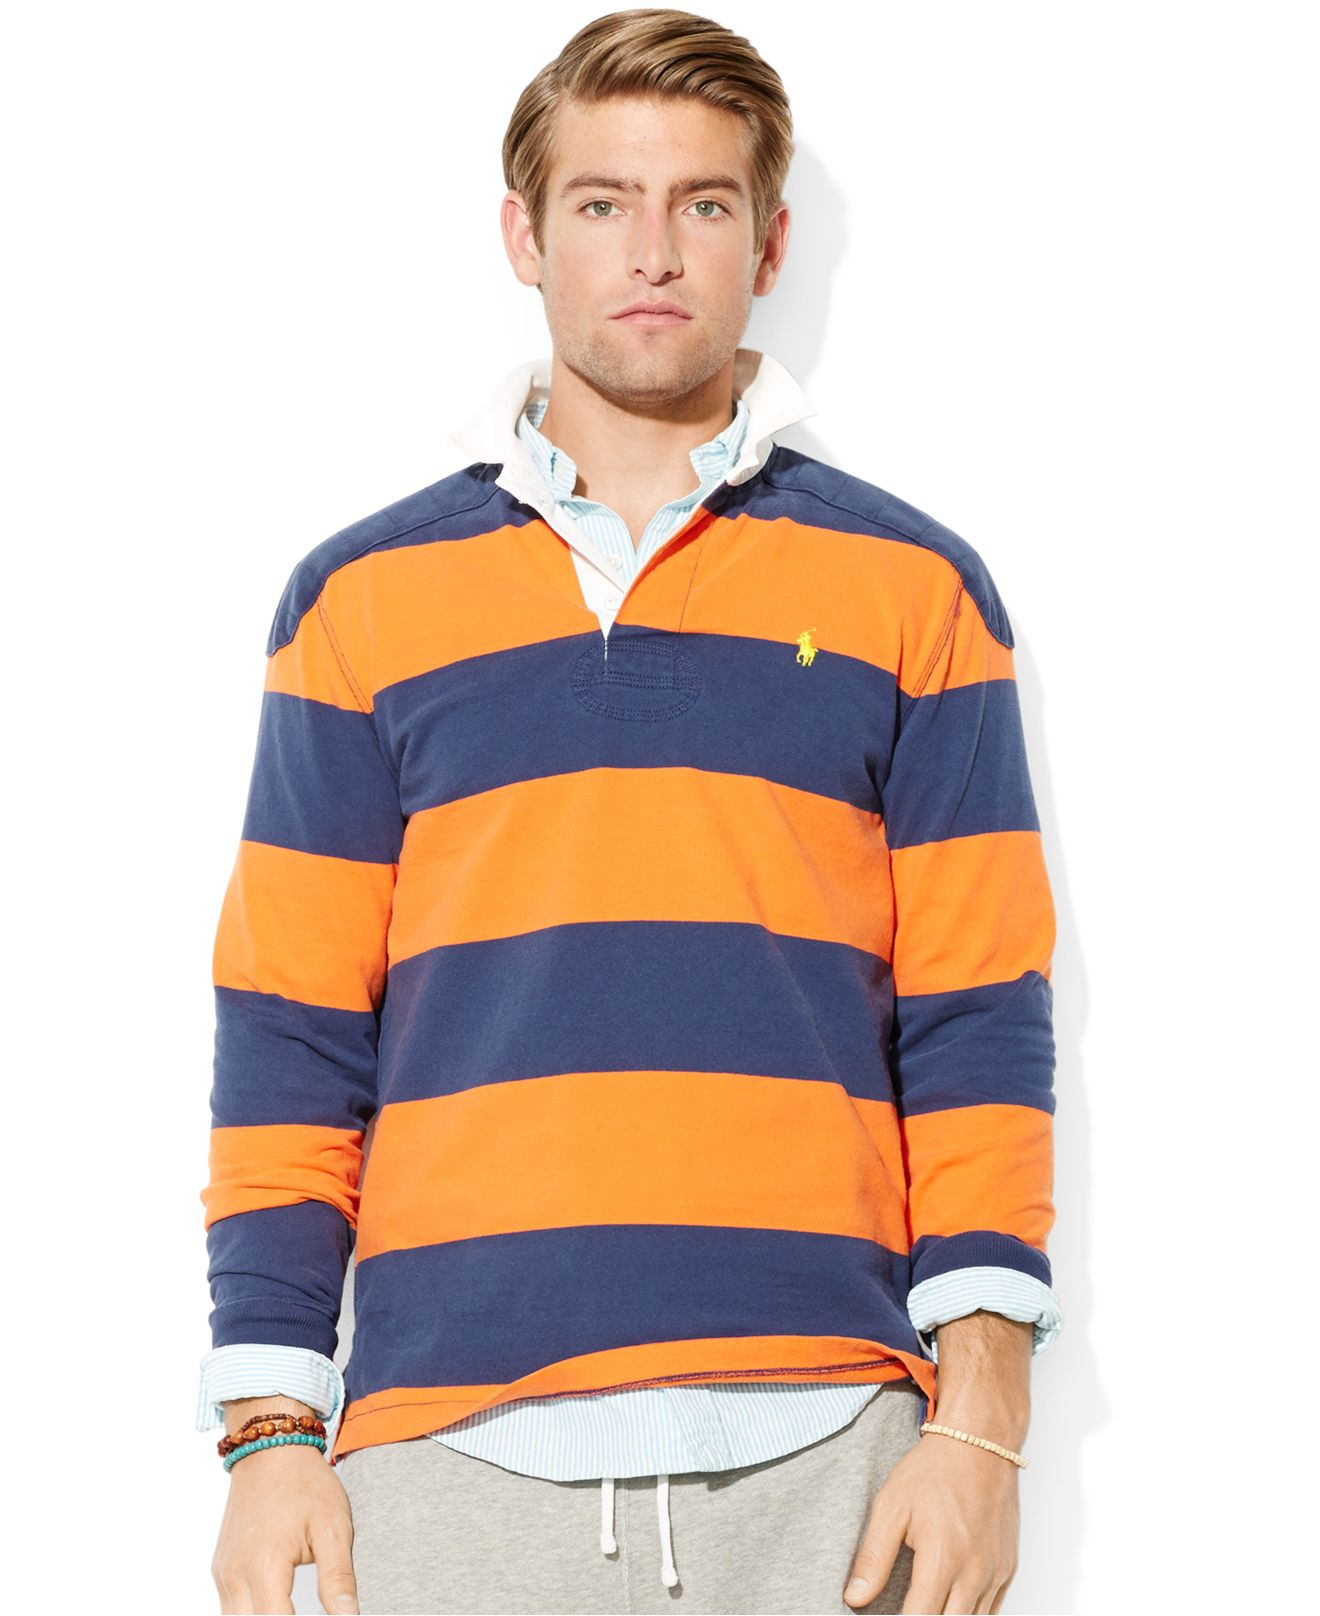  Polo  Ralph Lauren Striped Rugby  Shirt  in French Navy 